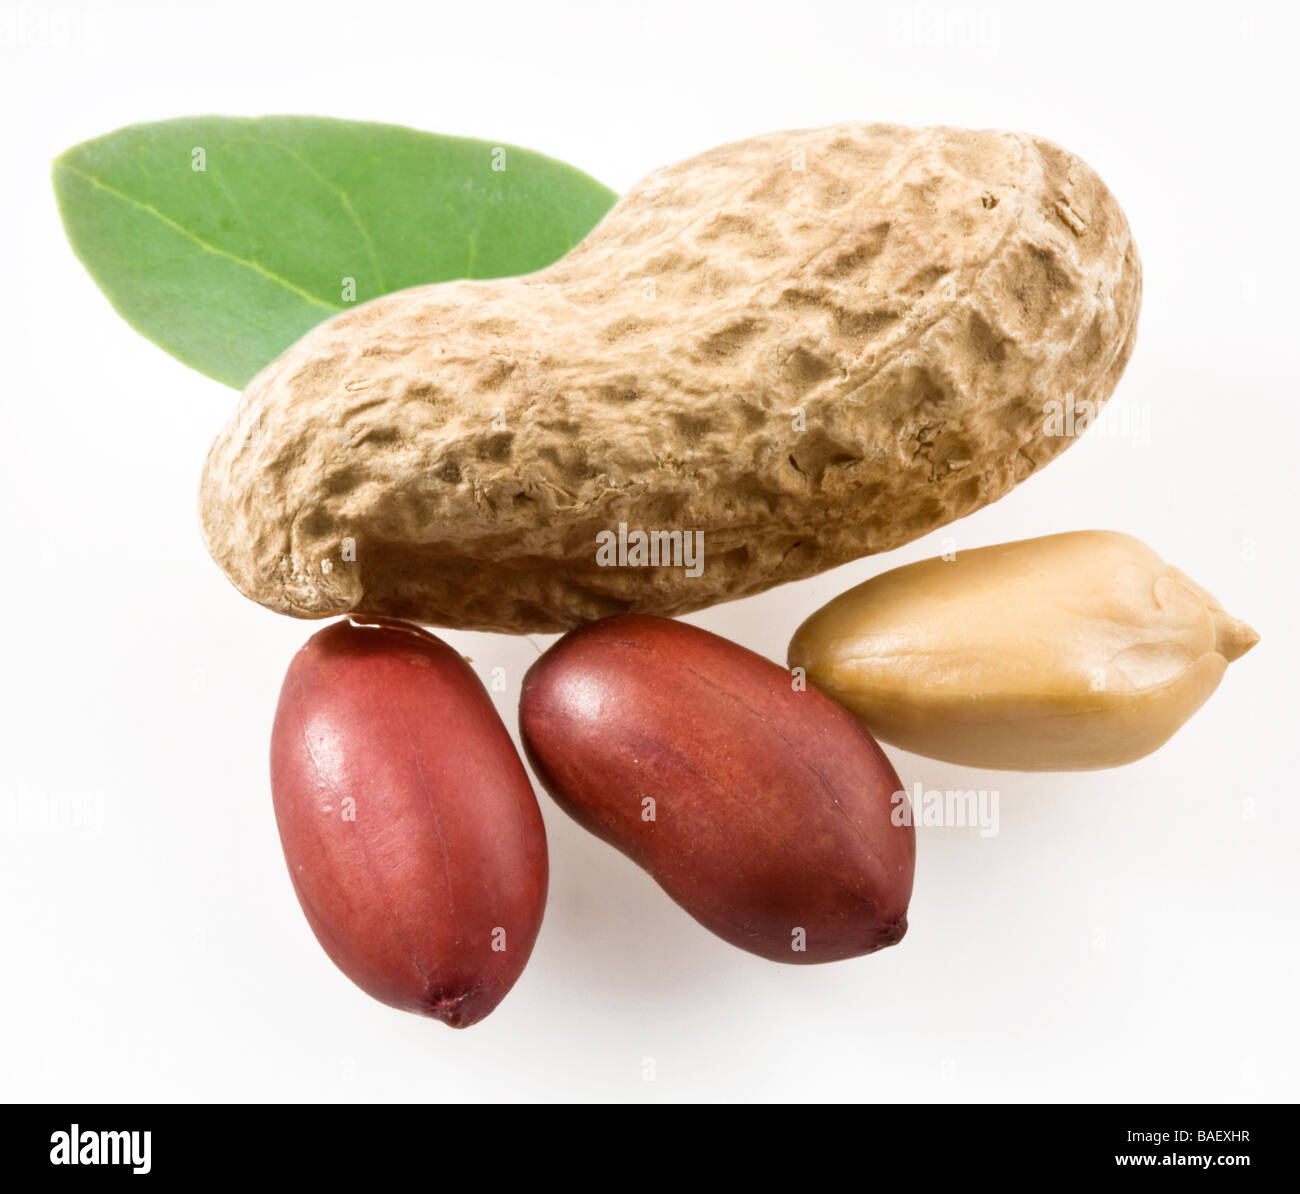 Peanut with pods and leaves on a white background Stock Photo